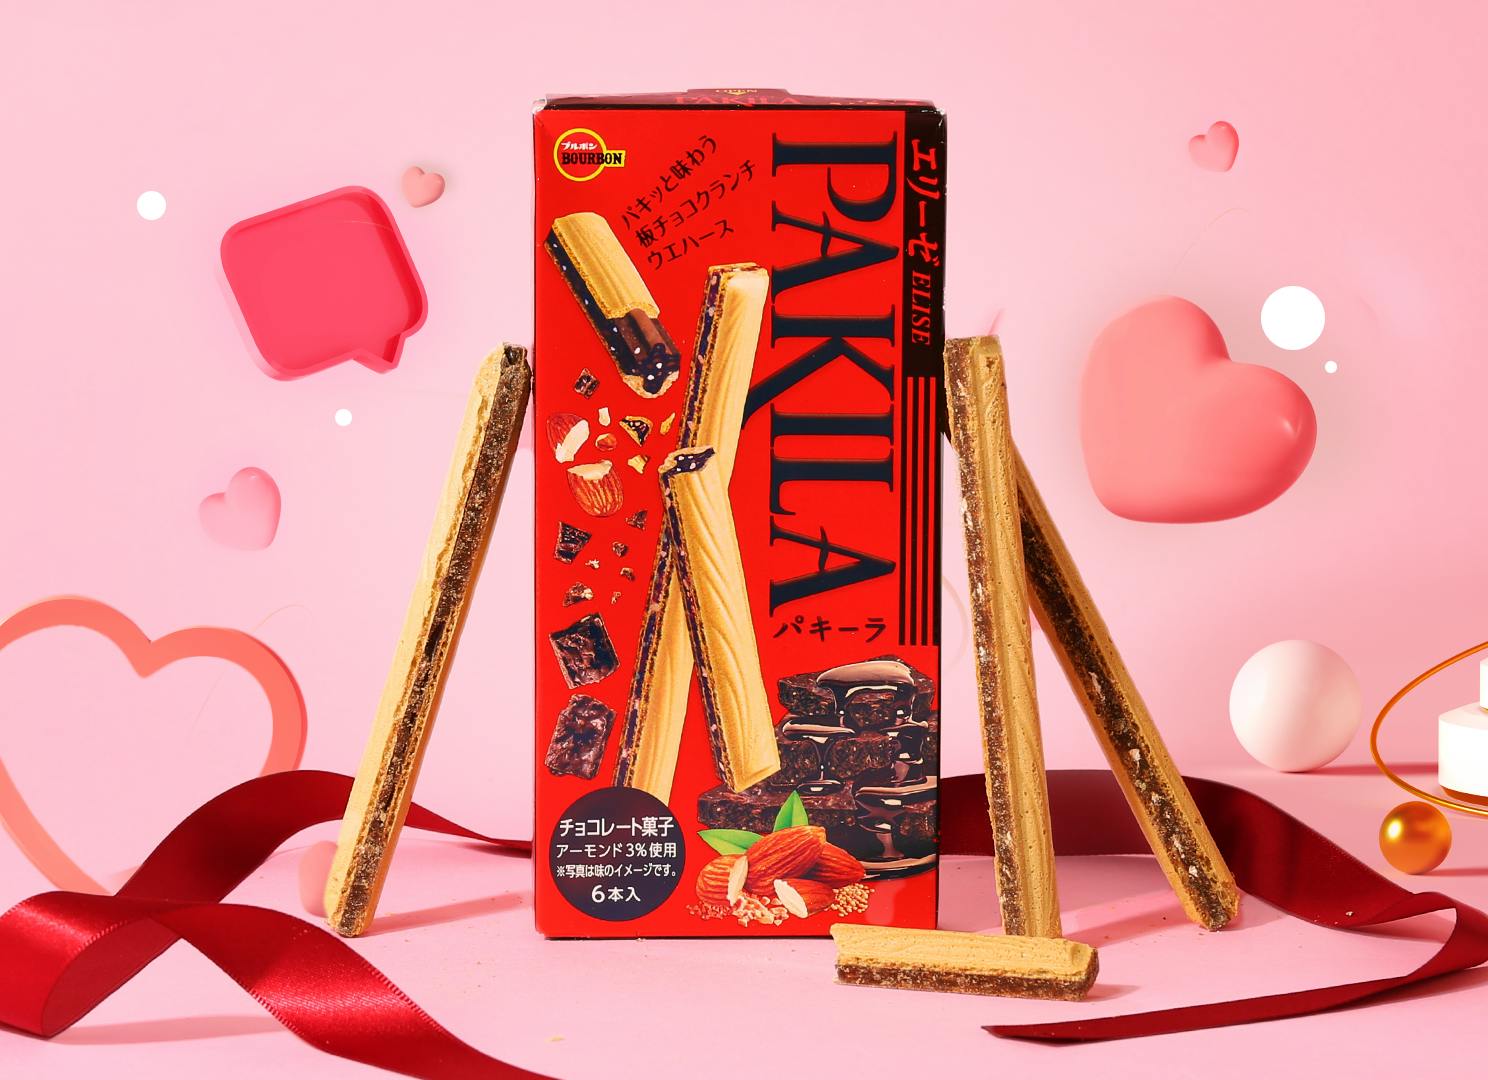 Pakila chocolate wafers stand near pink Valentine's Day hearts and a red ribbon